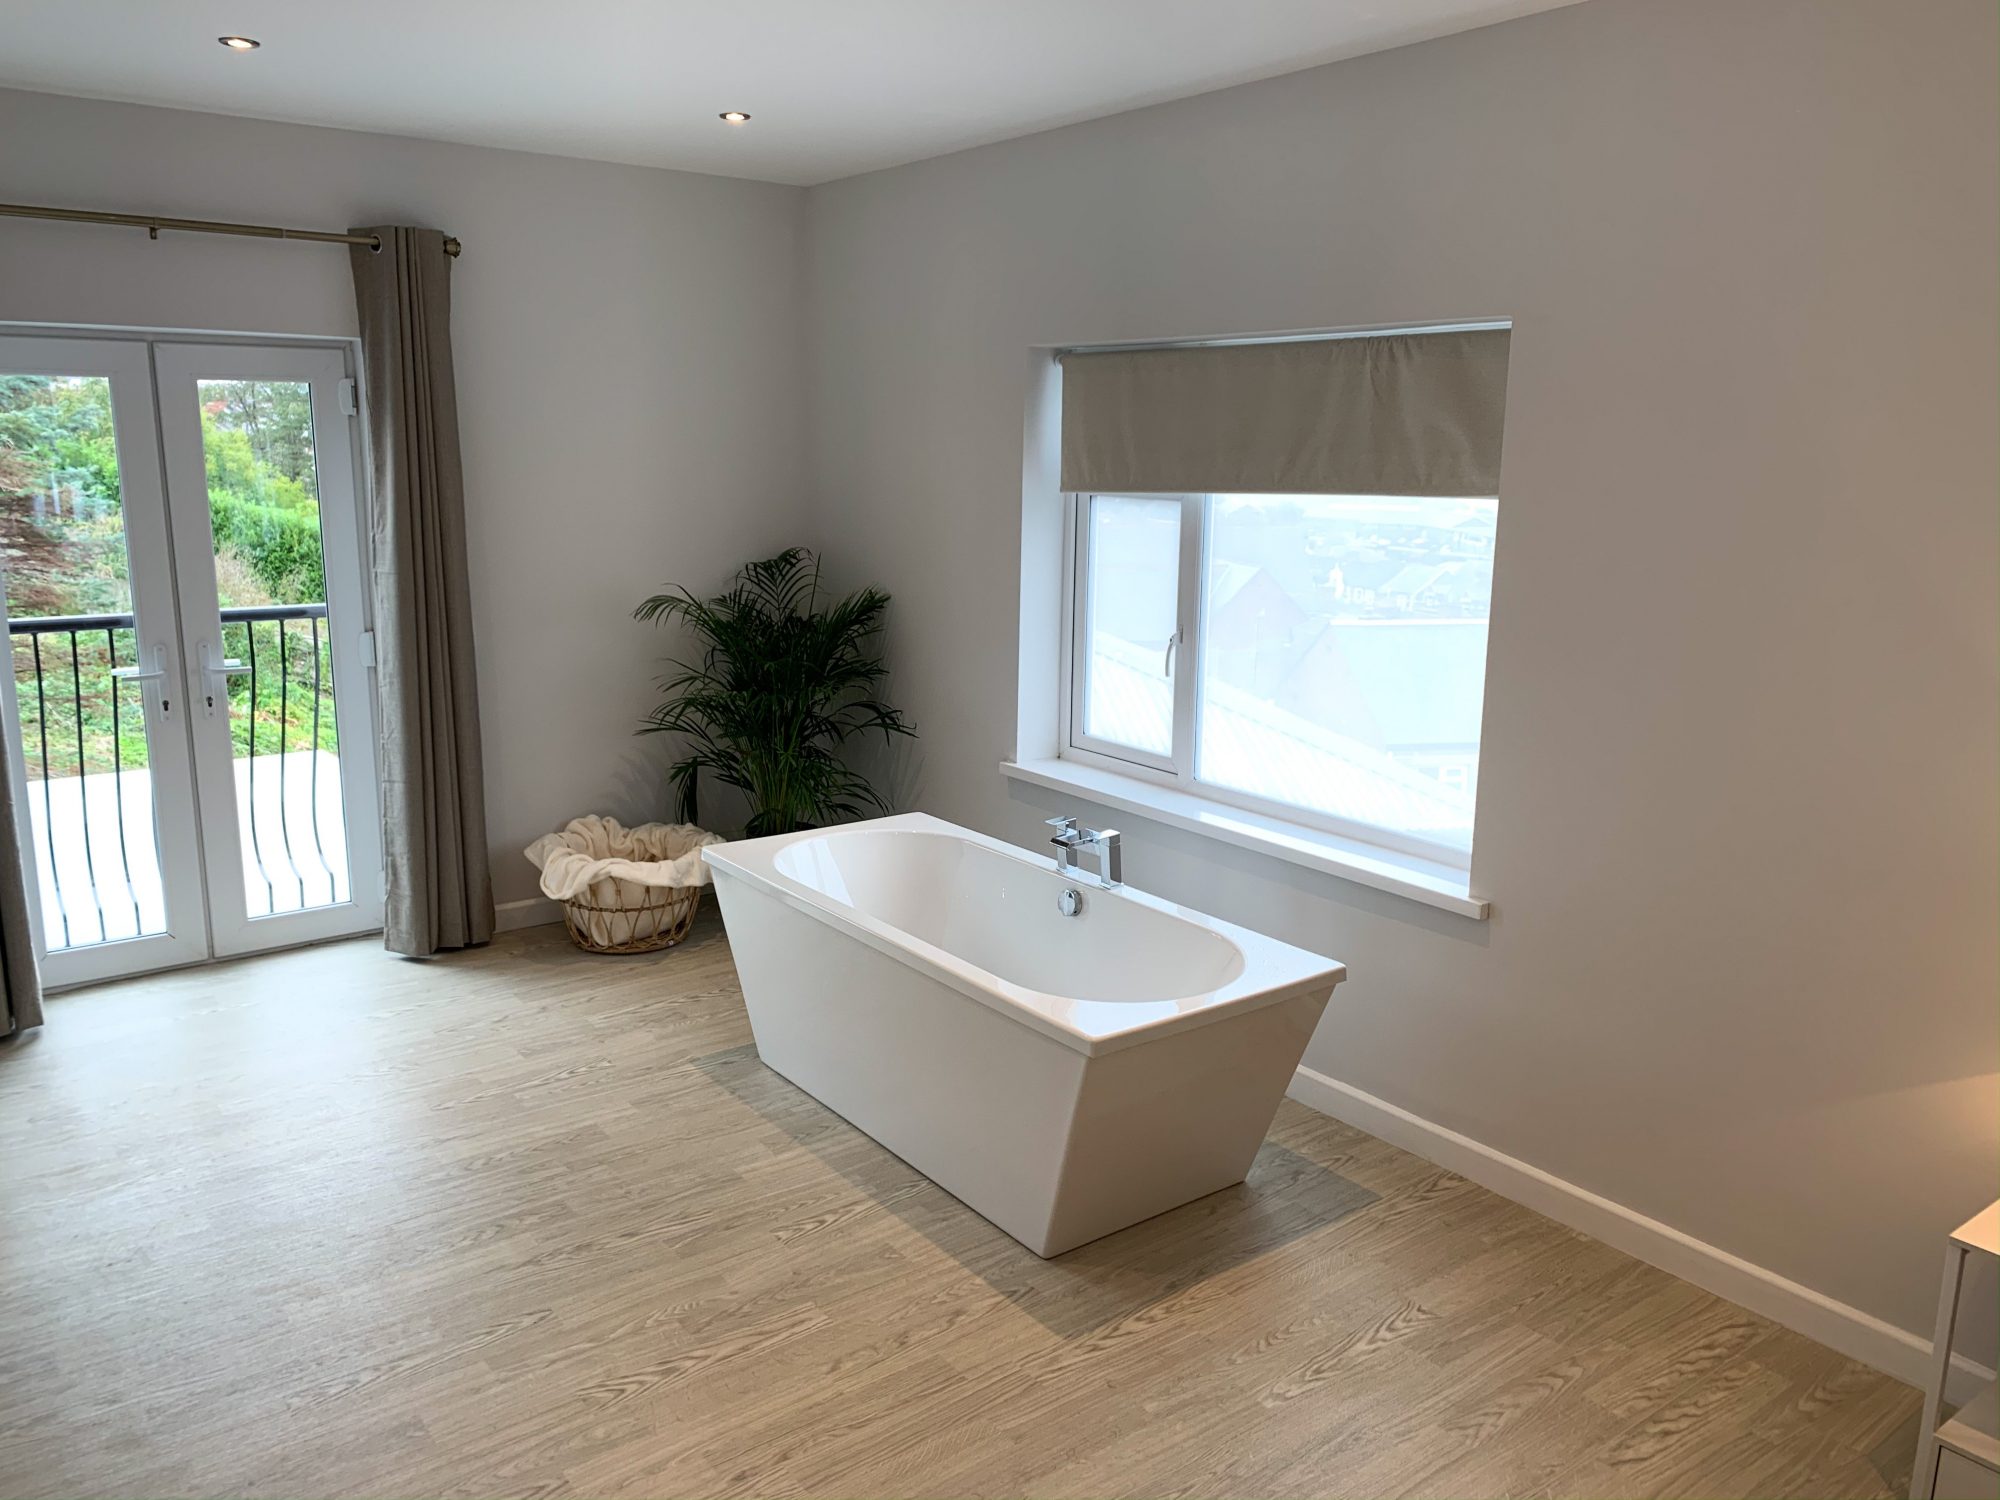 Freestanding Bath in the main suite